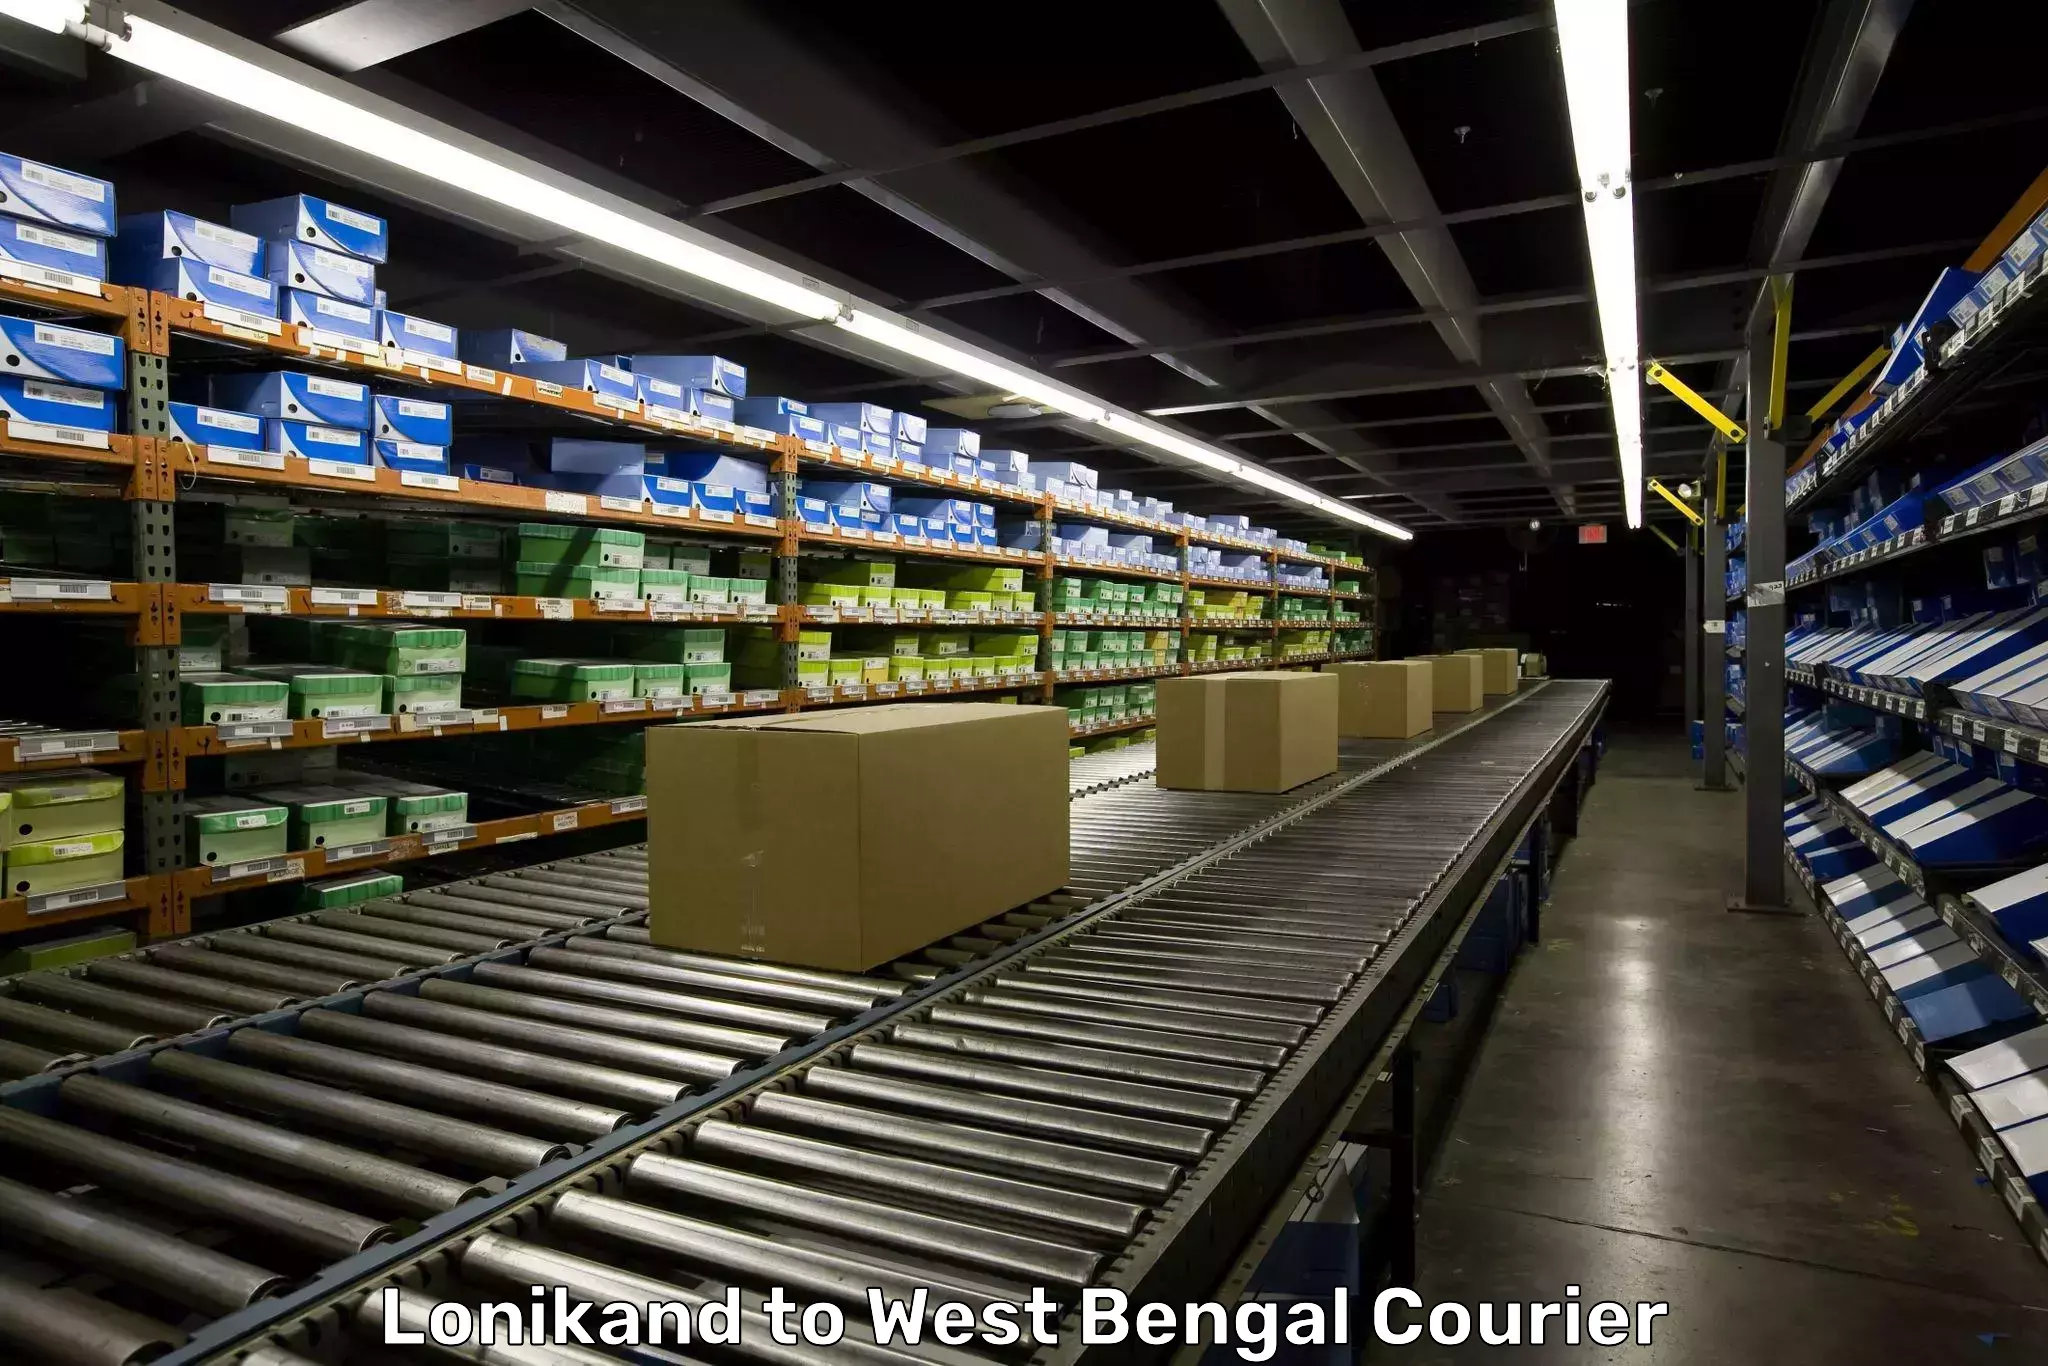 Luggage transport company Lonikand to West Bengal